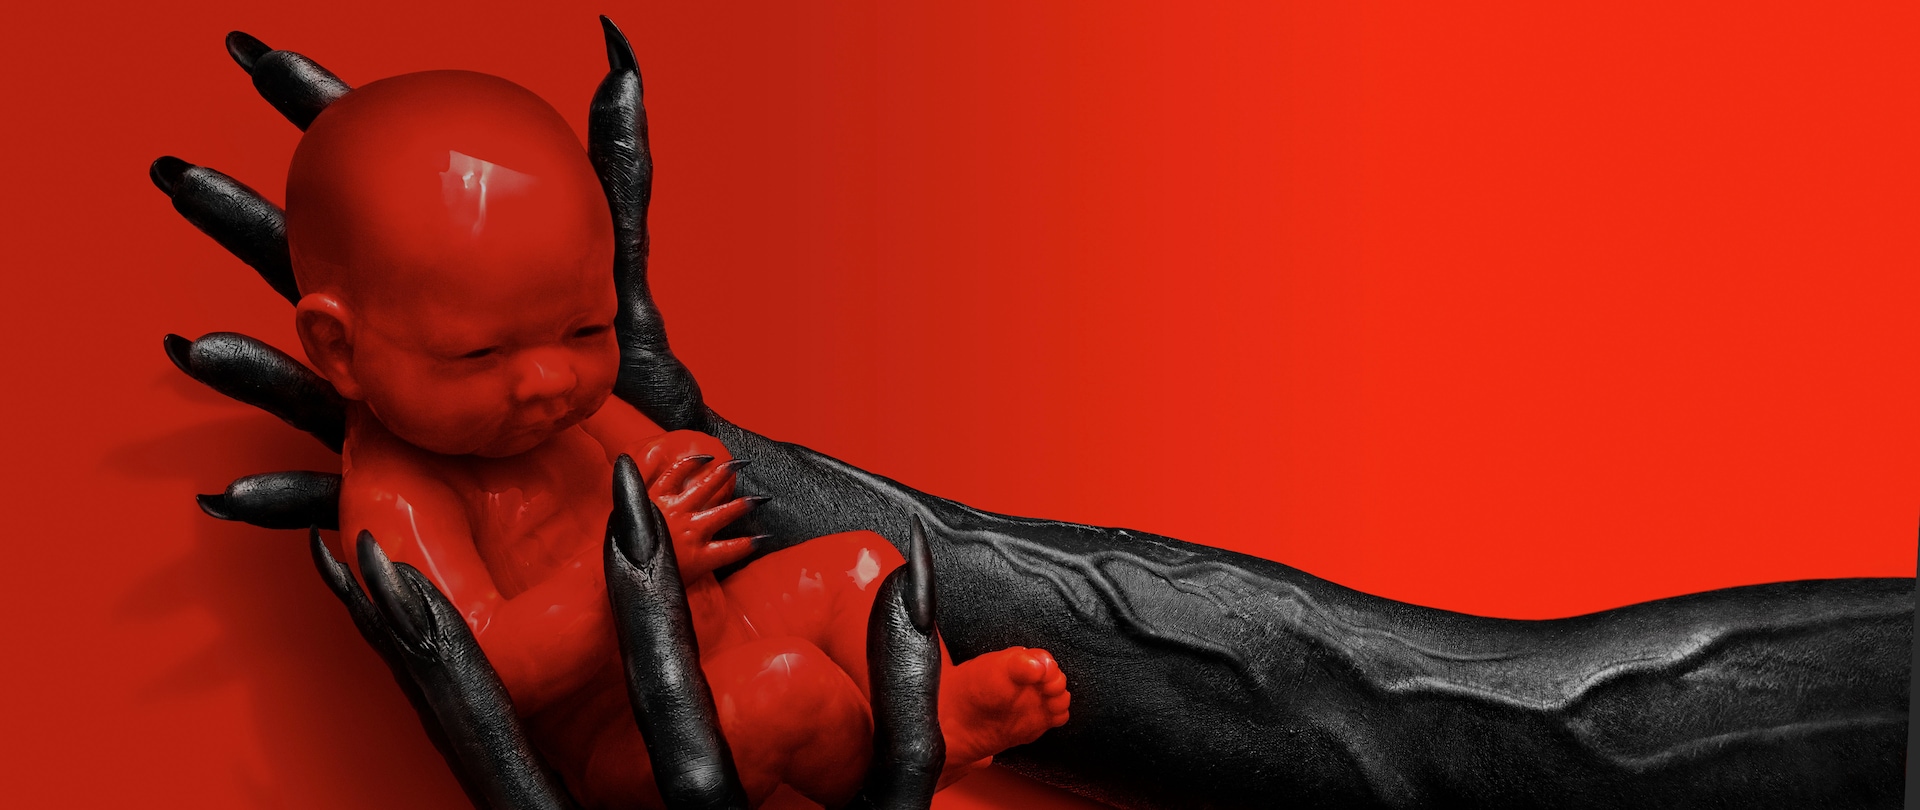 Red baby with black claws cradled by black hands American Horror Story 8 Apocalypse